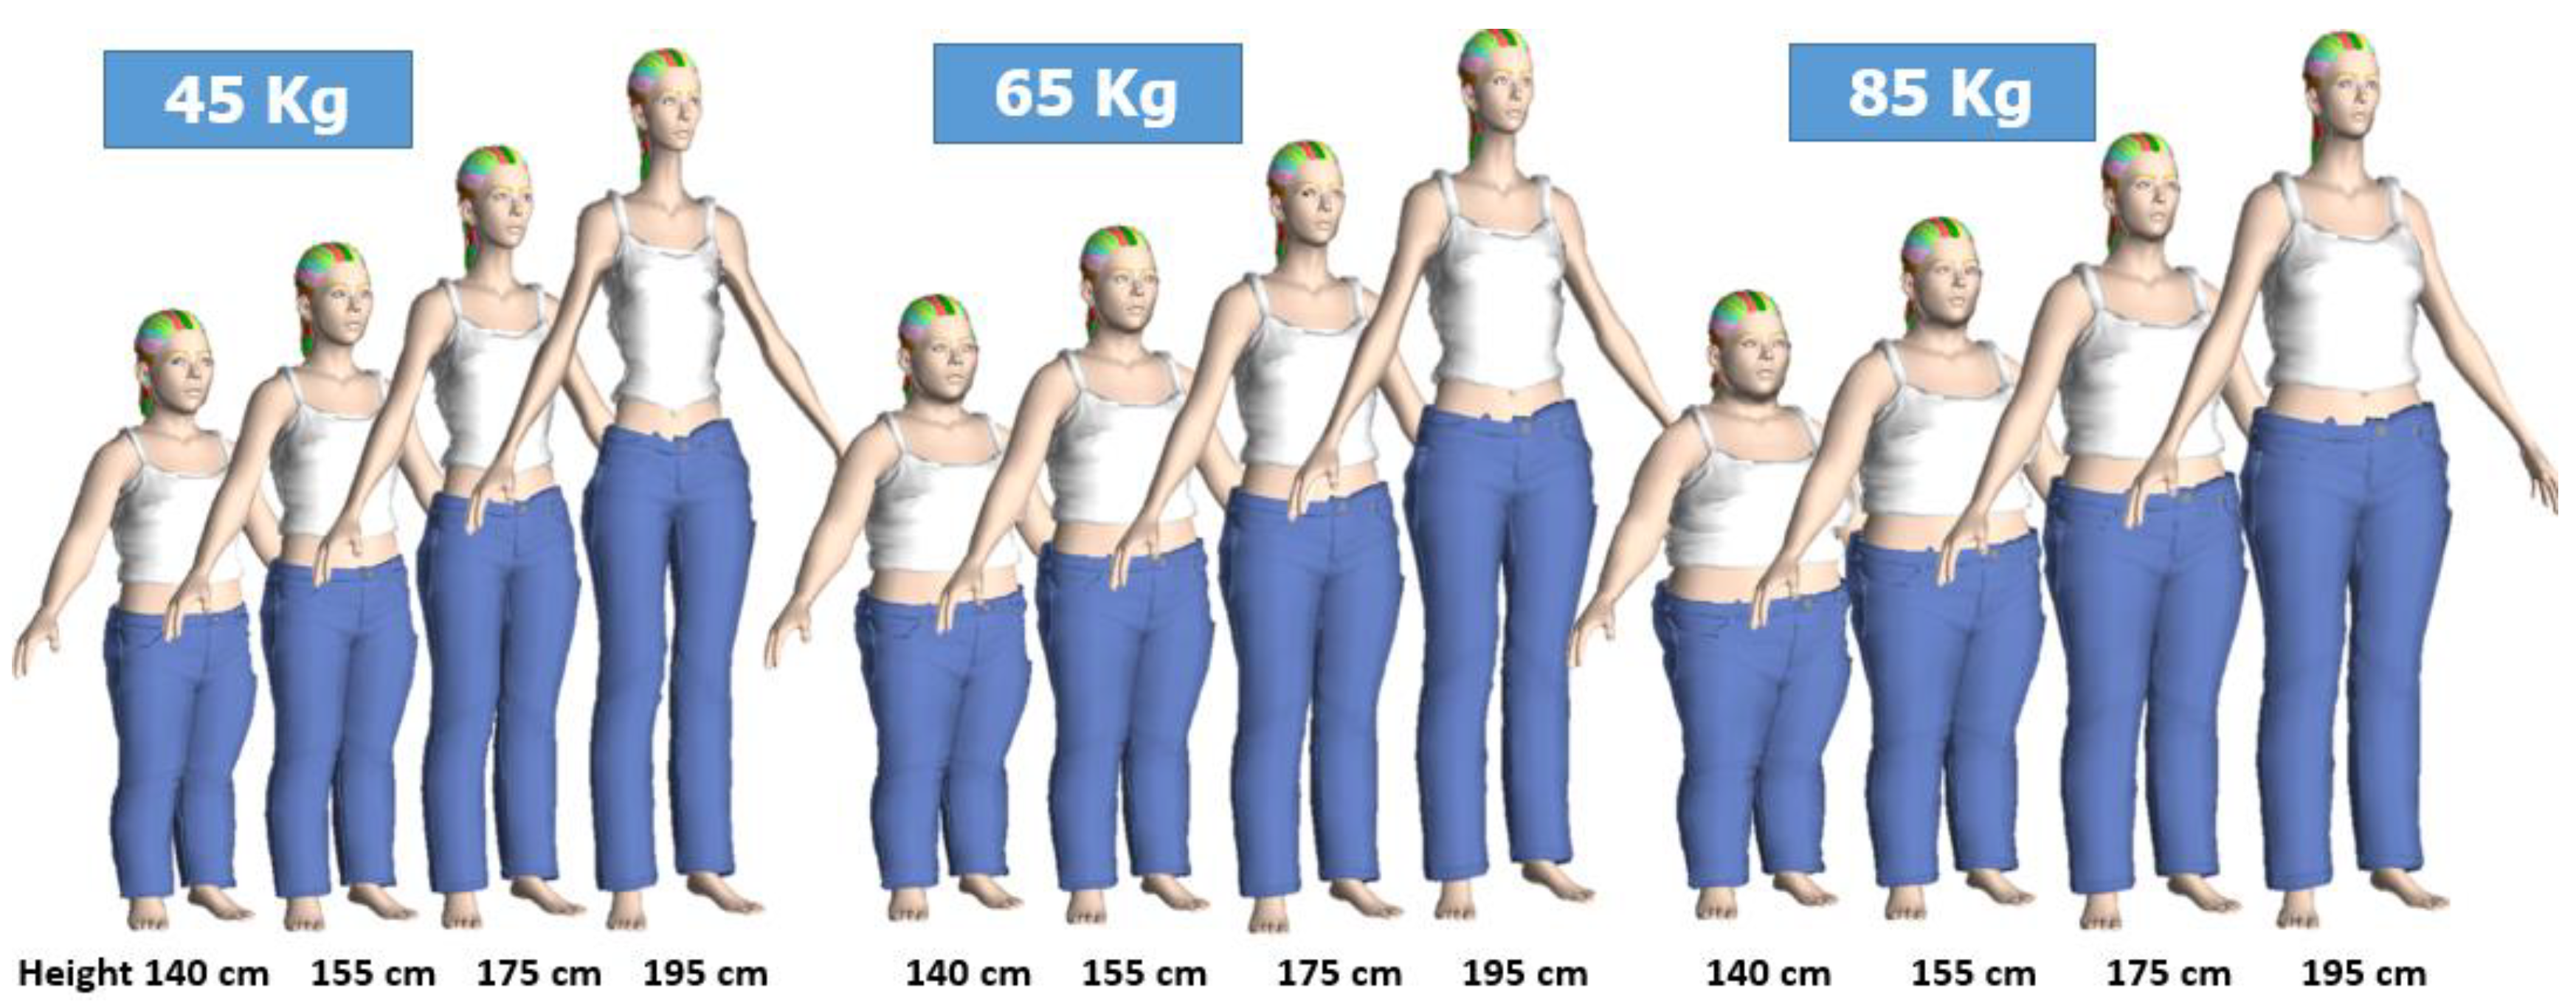 3D Body Models. (a) A SCAPE body model [7] realistically